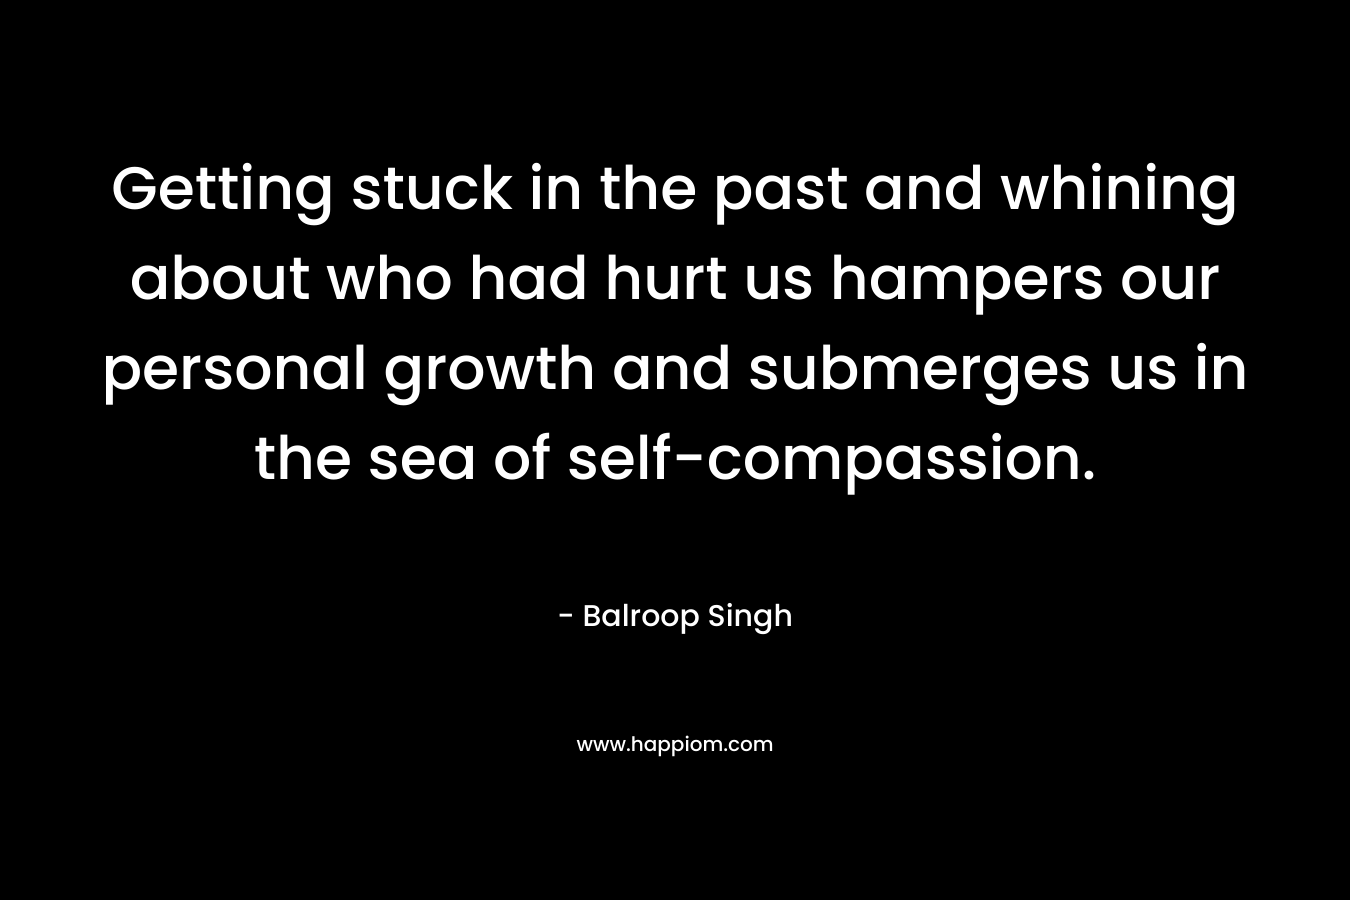 Getting stuck in the past and whining about who had hurt us hampers our personal growth and submerges us in the sea of self-compassion. – Balroop Singh